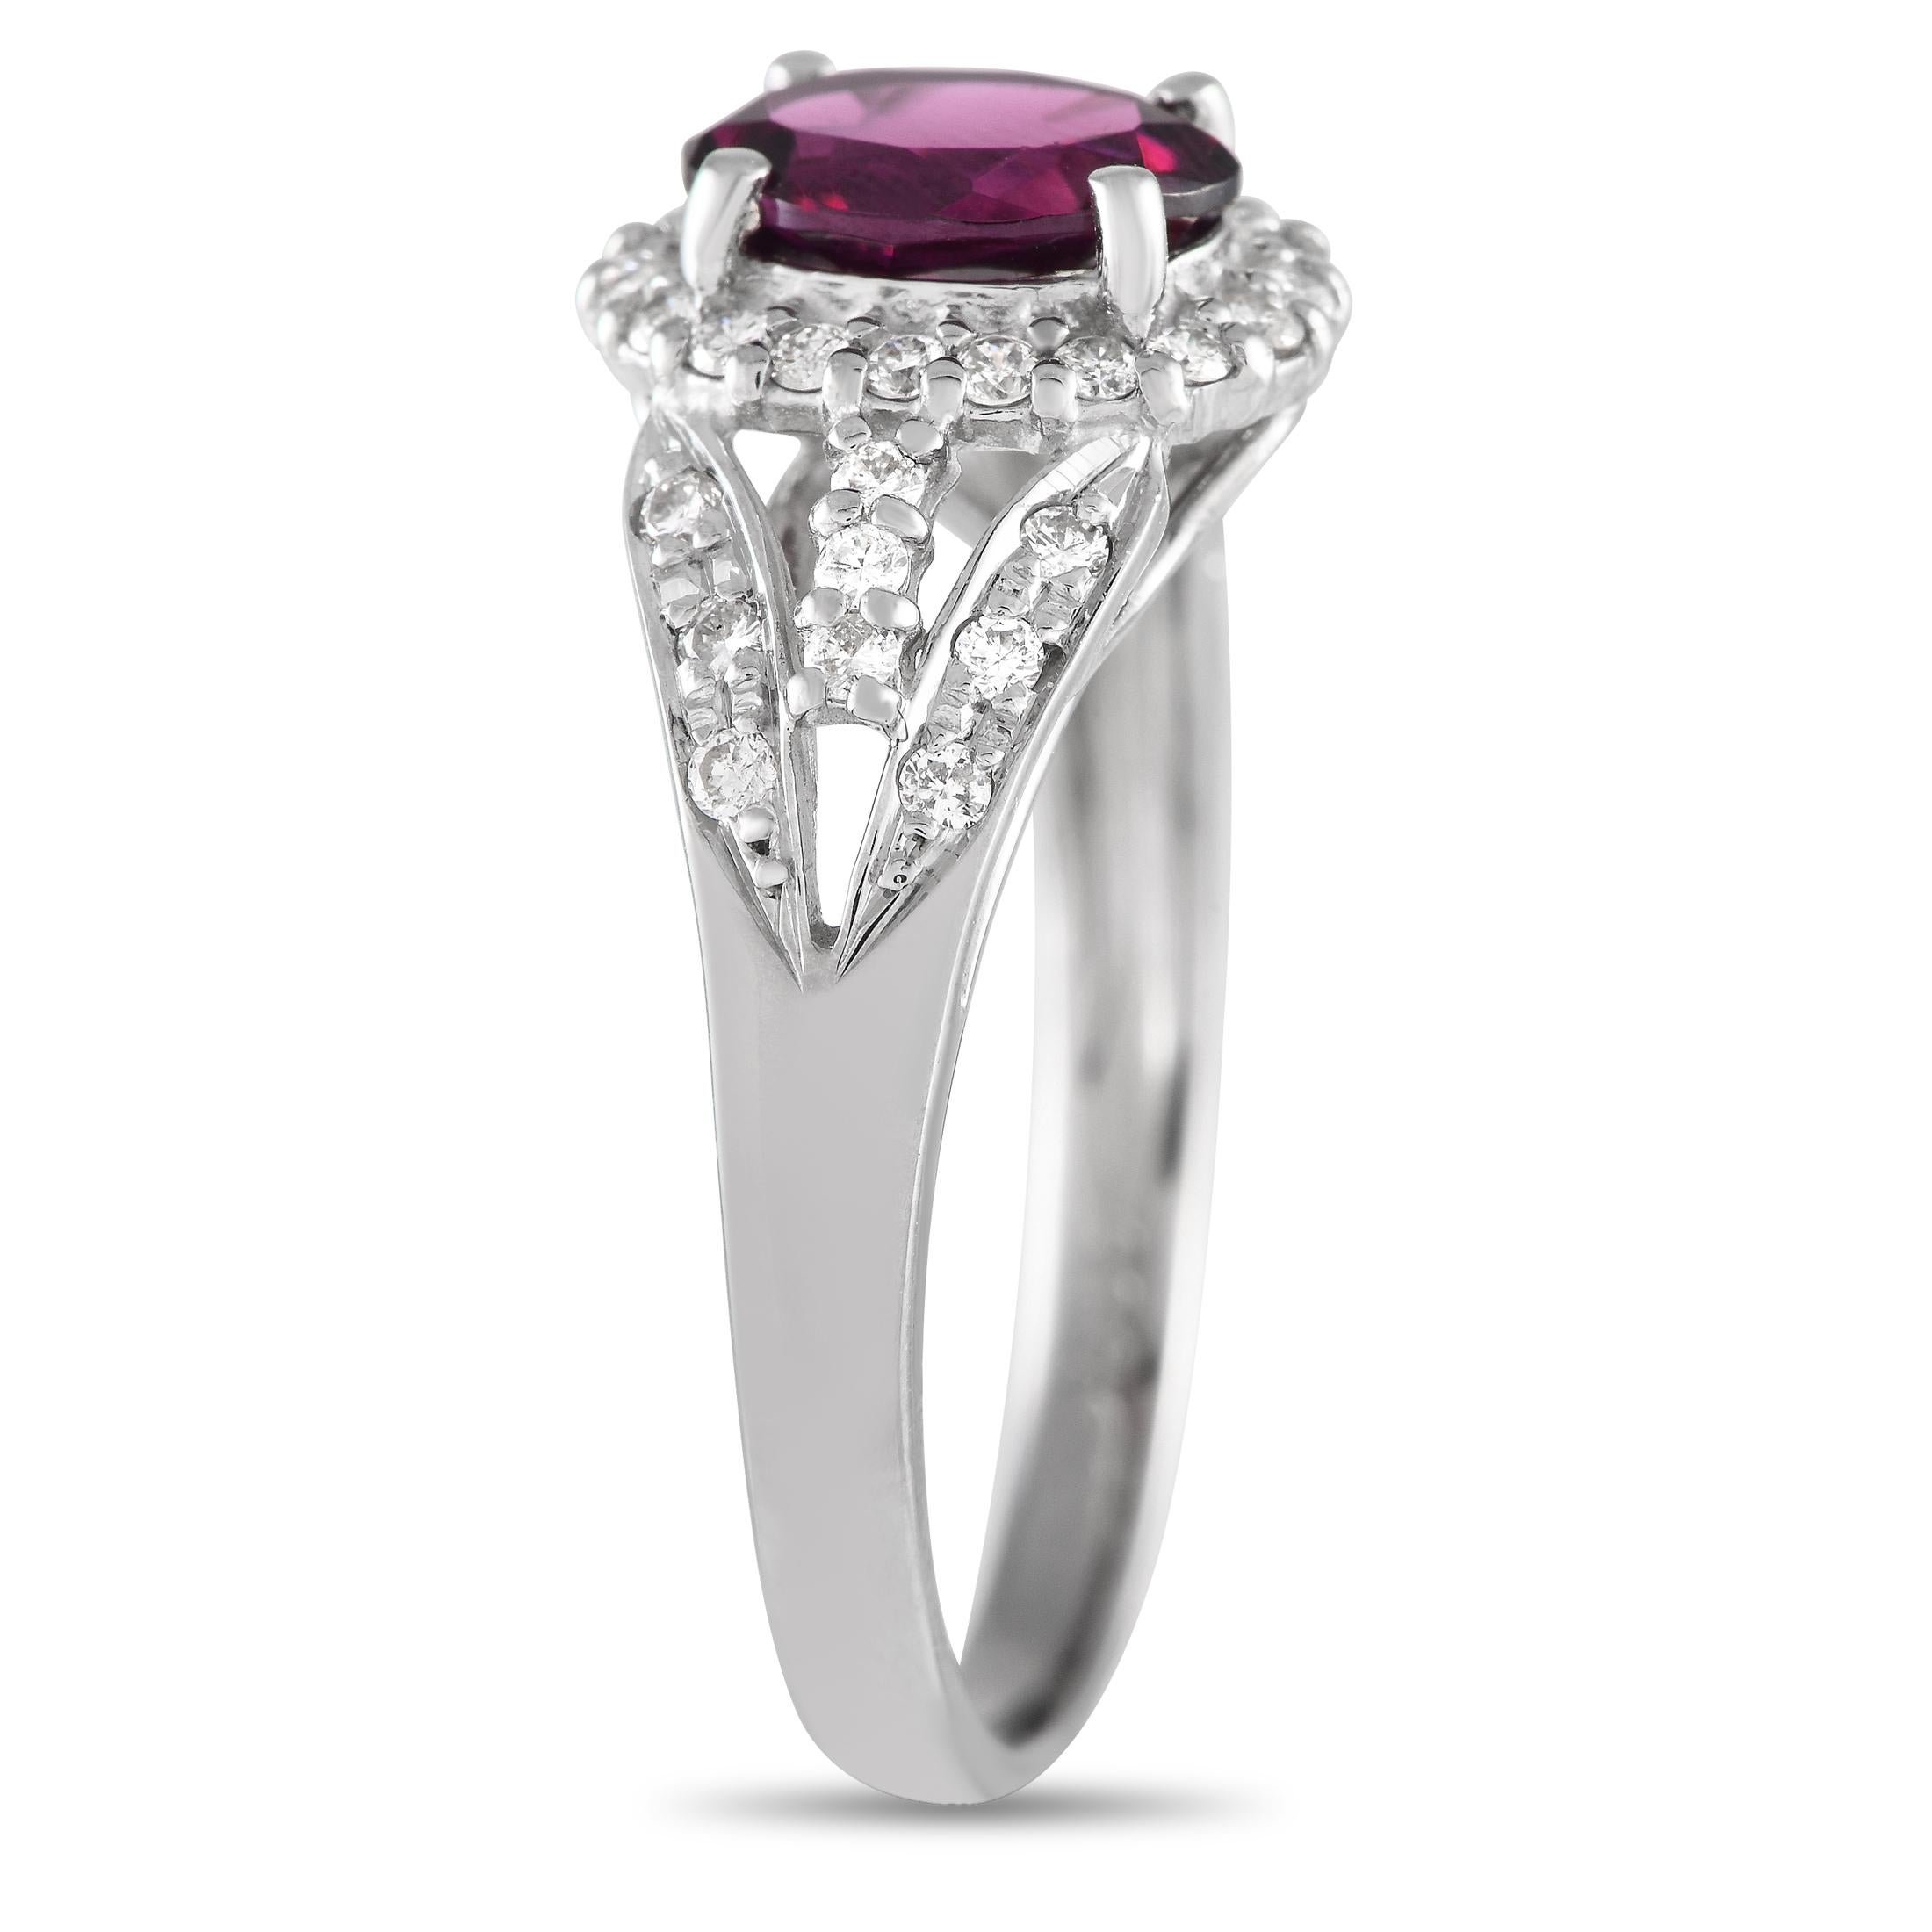 This ring, with its solid platinum split shank and rhodolite garnet centerstone, captures the idea of nostalgia. Petite round diamonds elegantly line the split shoulders and encircle the purplish-pink central gem. The ring's top dimensions measure